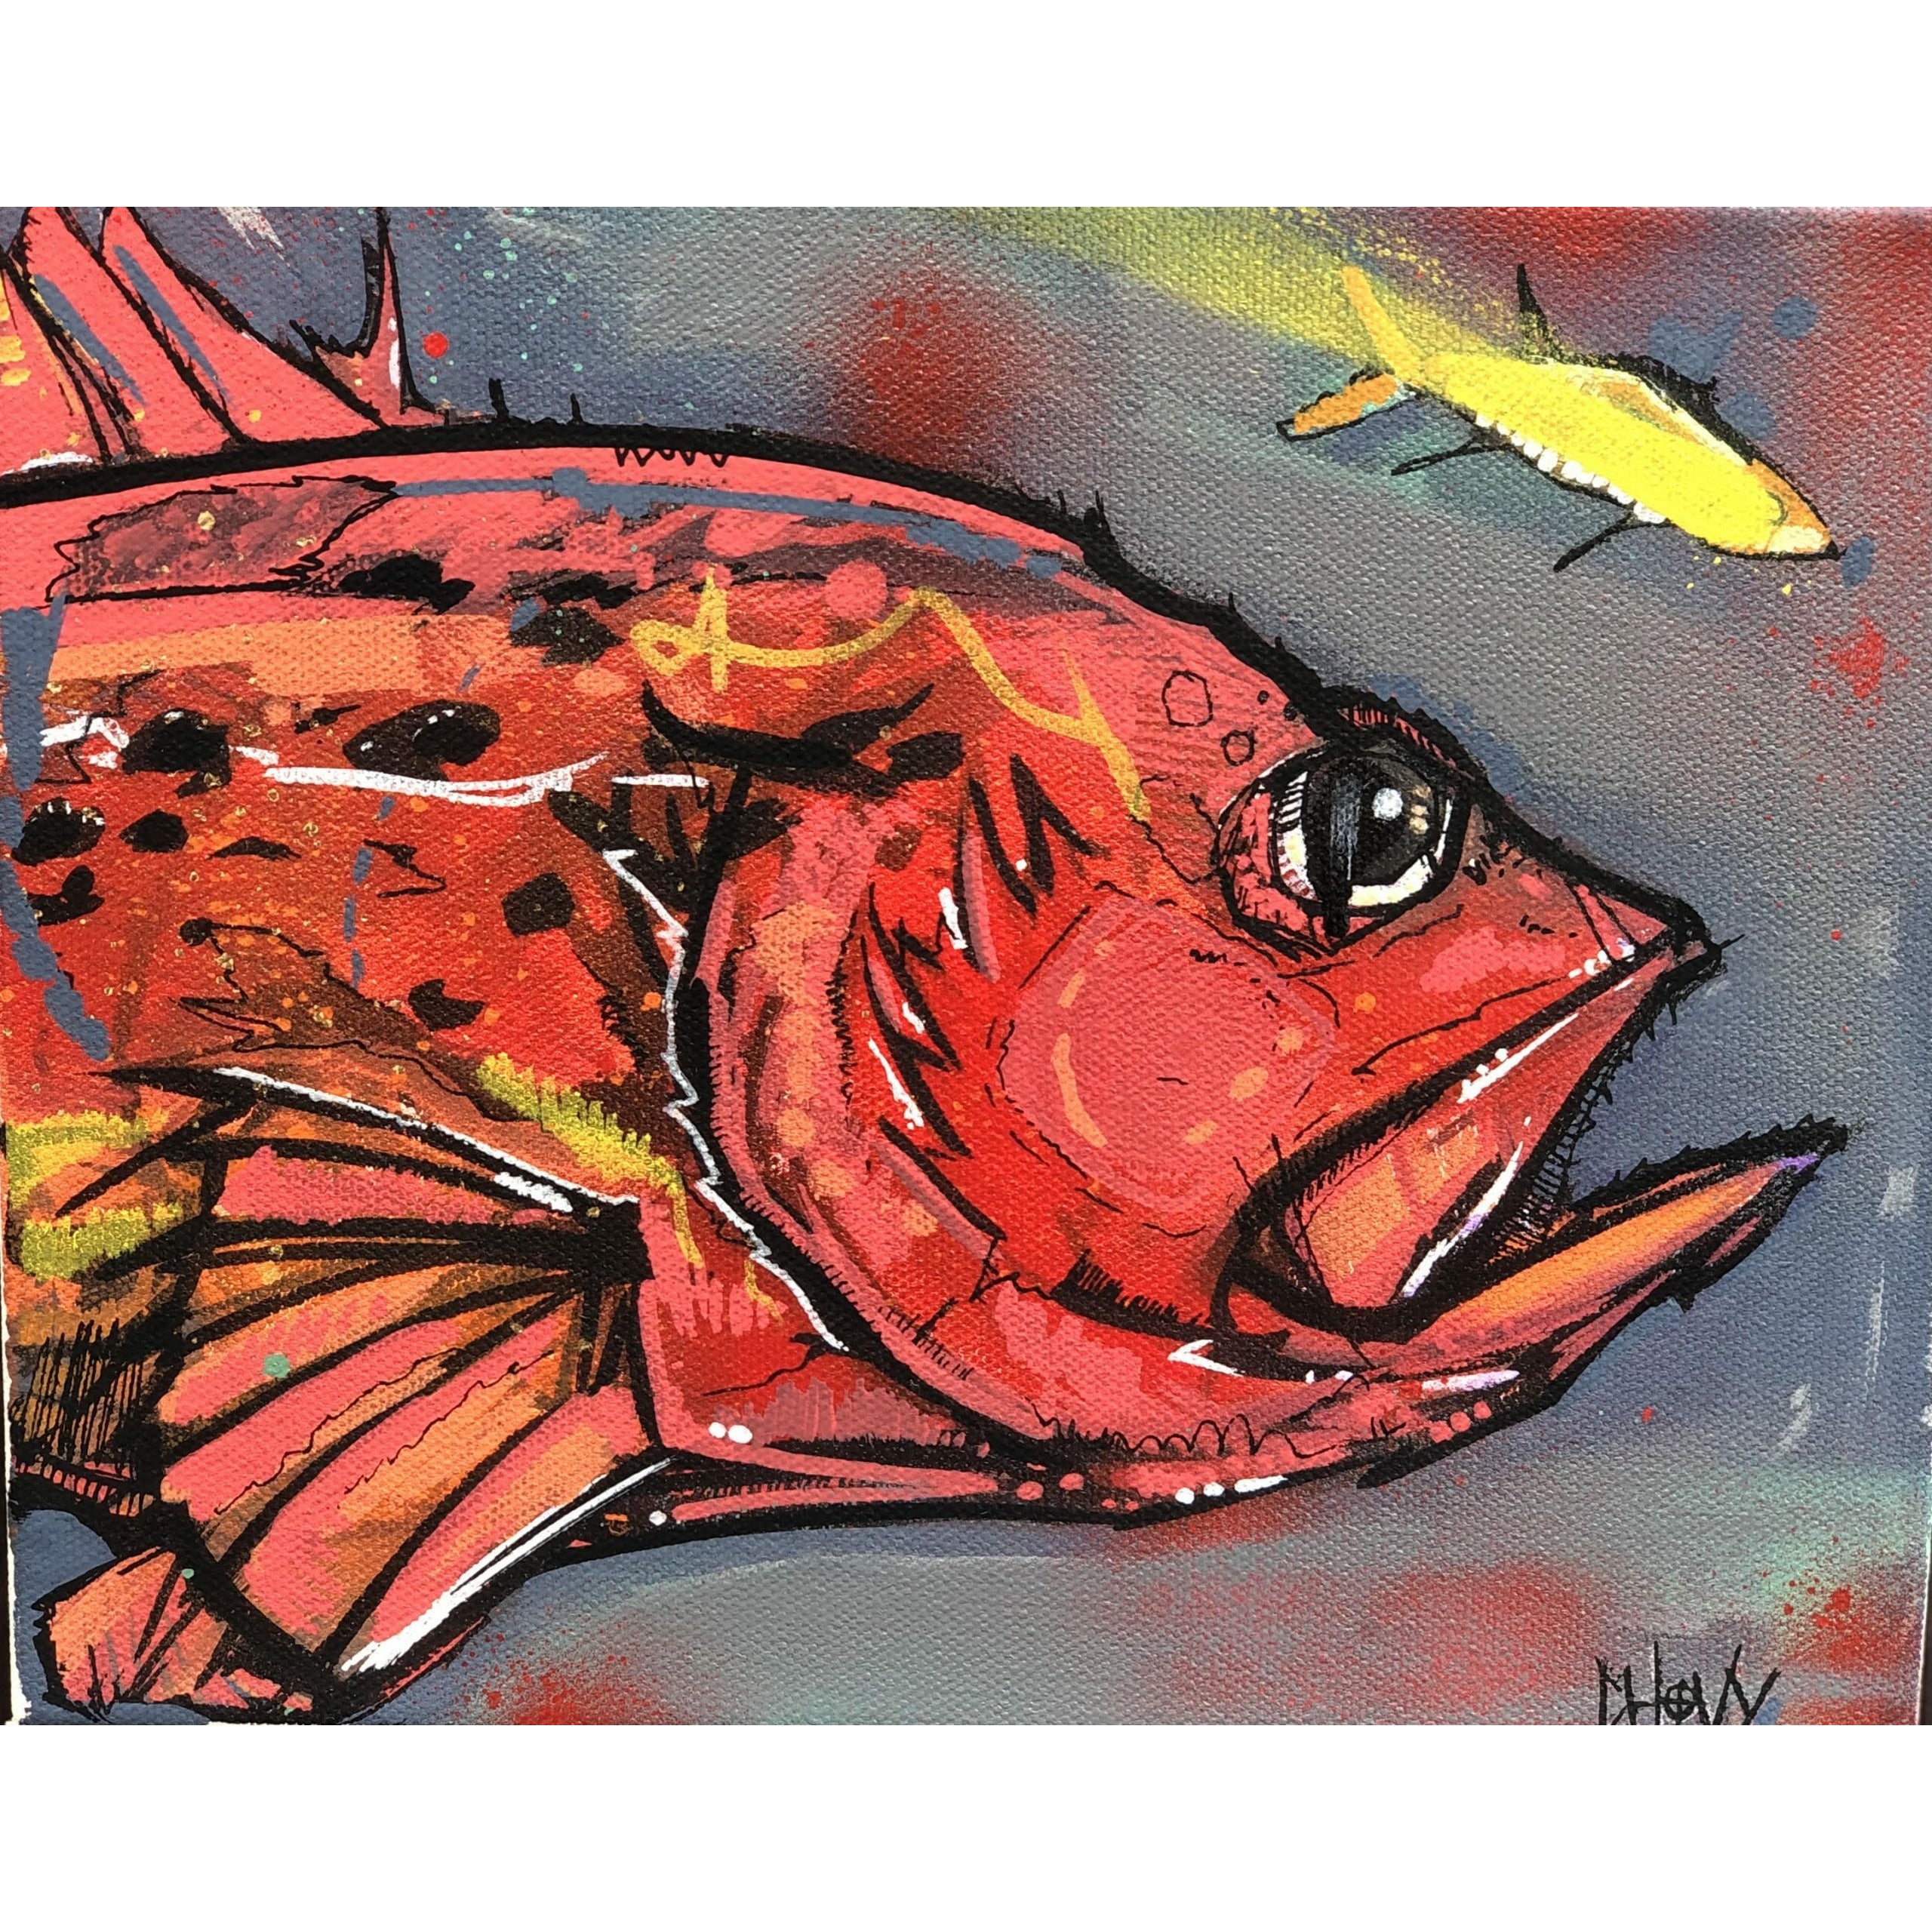 Vermilion Rockfish Painting by Chovy